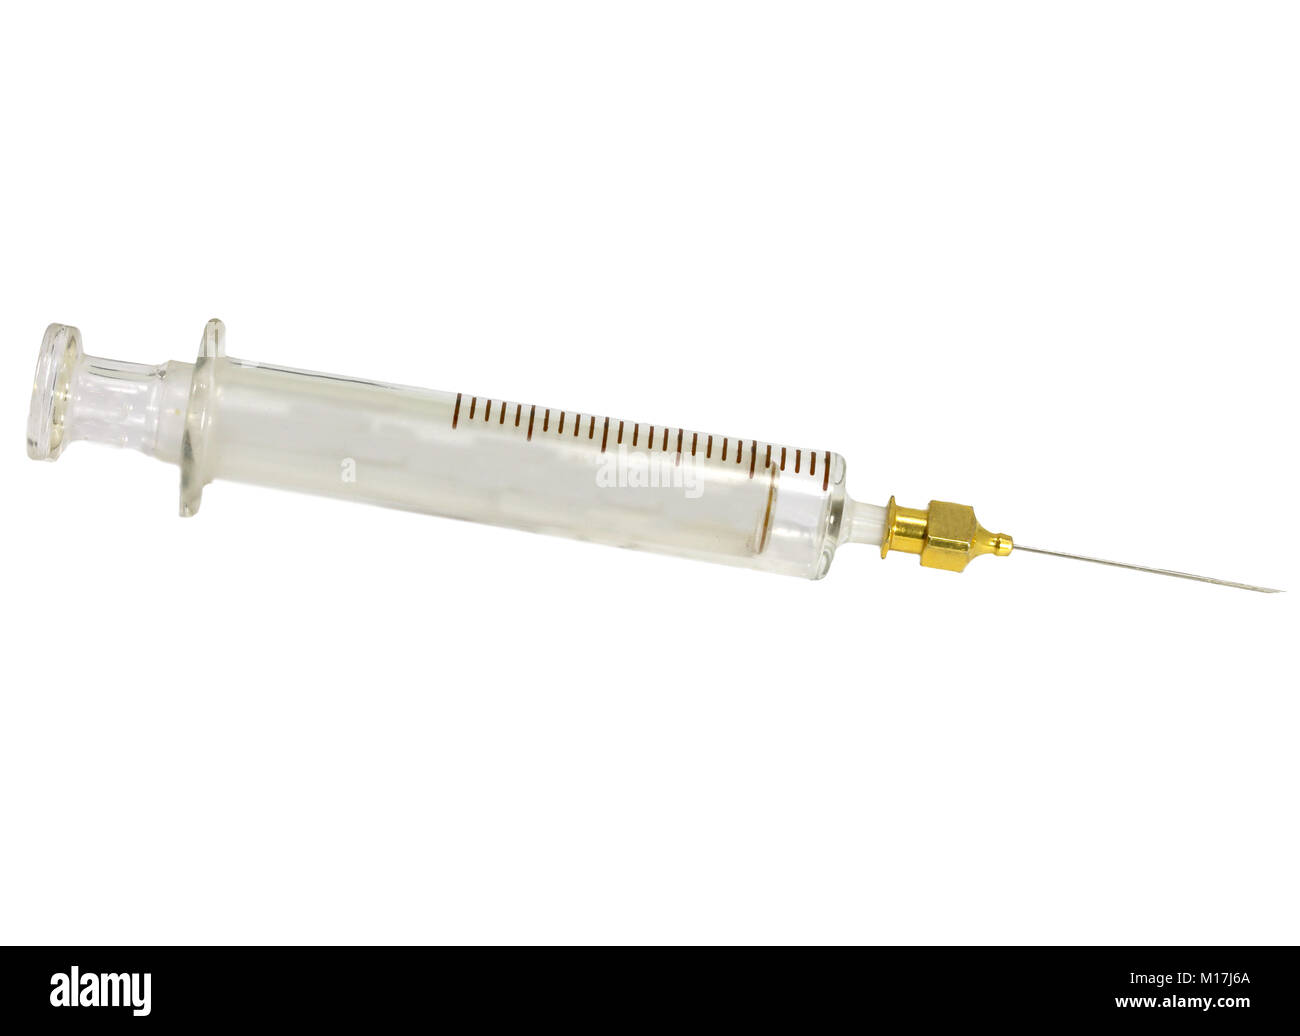 very old Vintage Medical glass syringe with stainless steel needle Stock Photo